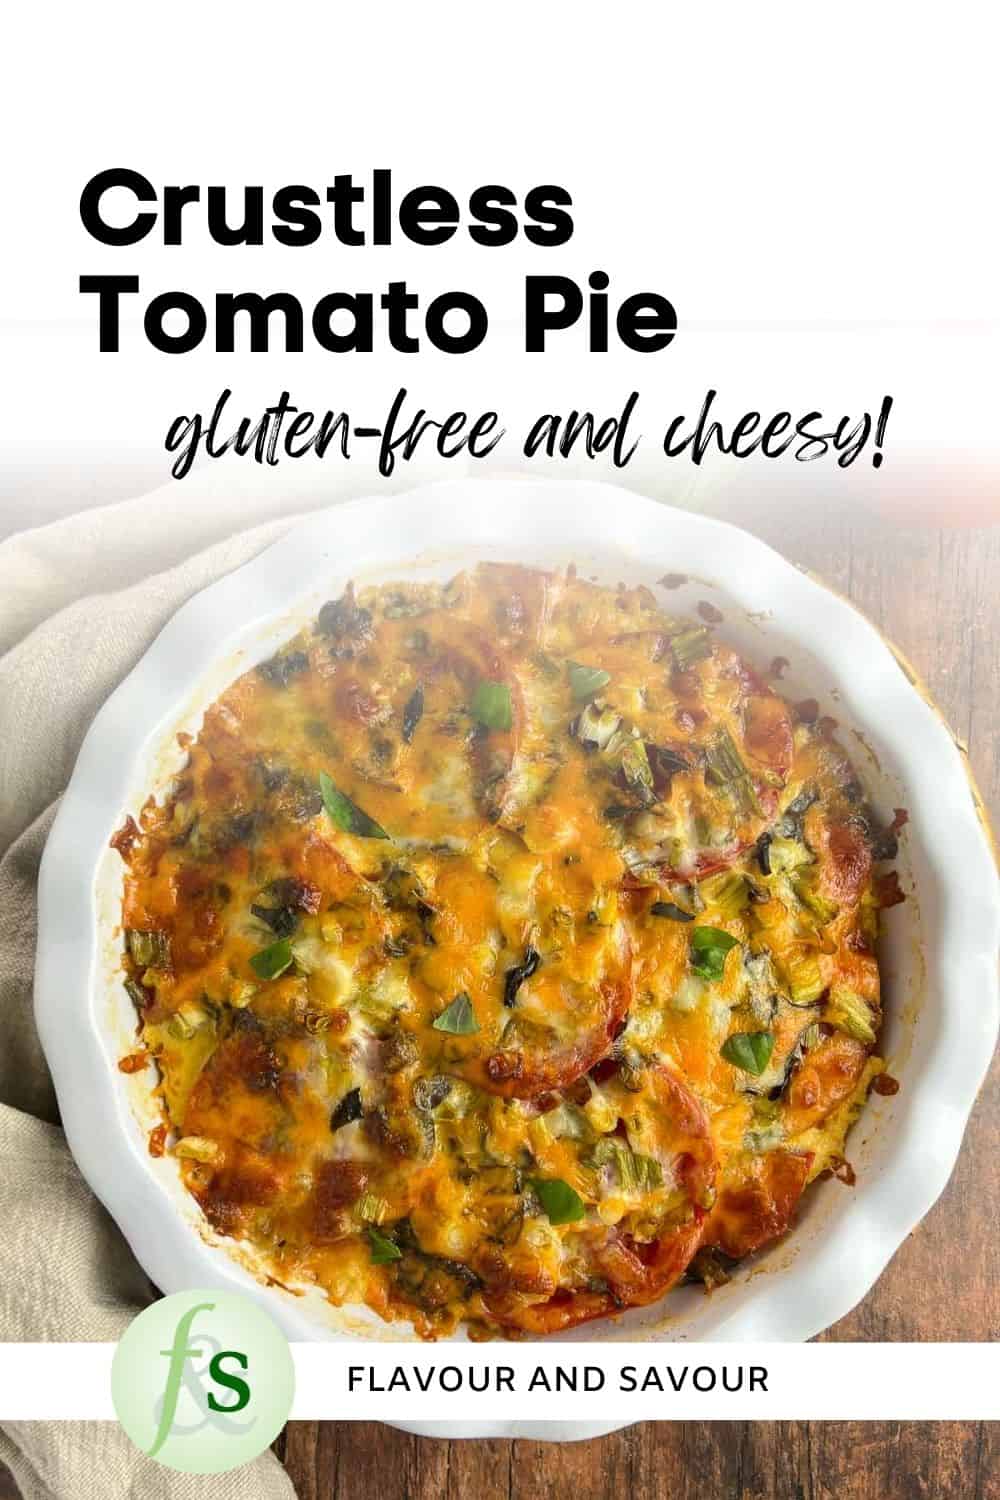 Image with text for crustless tomato pie.